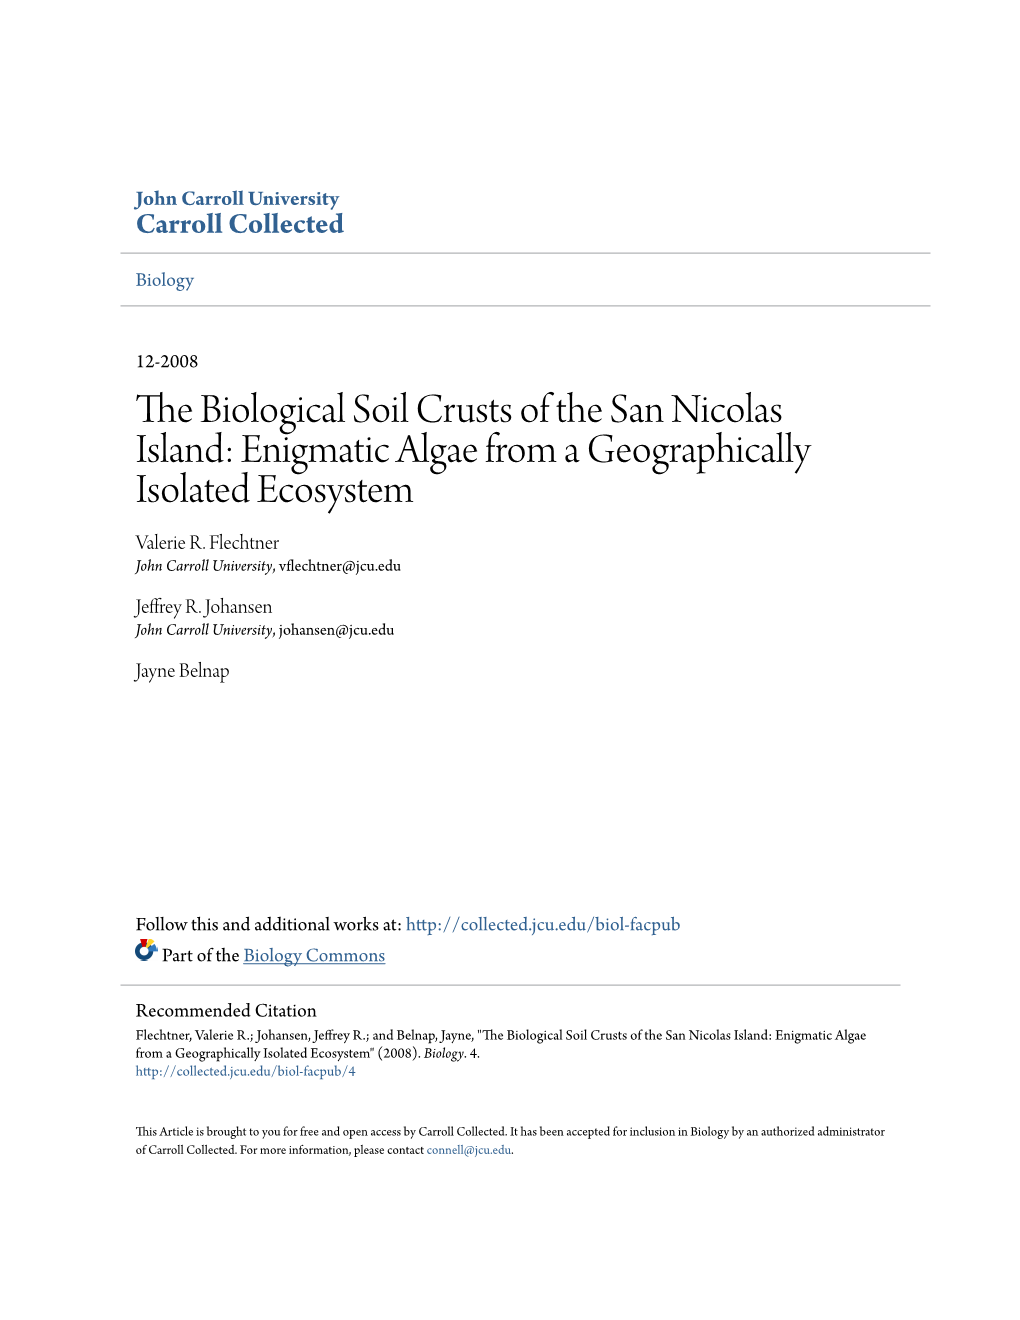 The Biological Soil Crusts of the San Nicolas Island: Enigmatic Algae from a Geographically Isolated Ecosystem